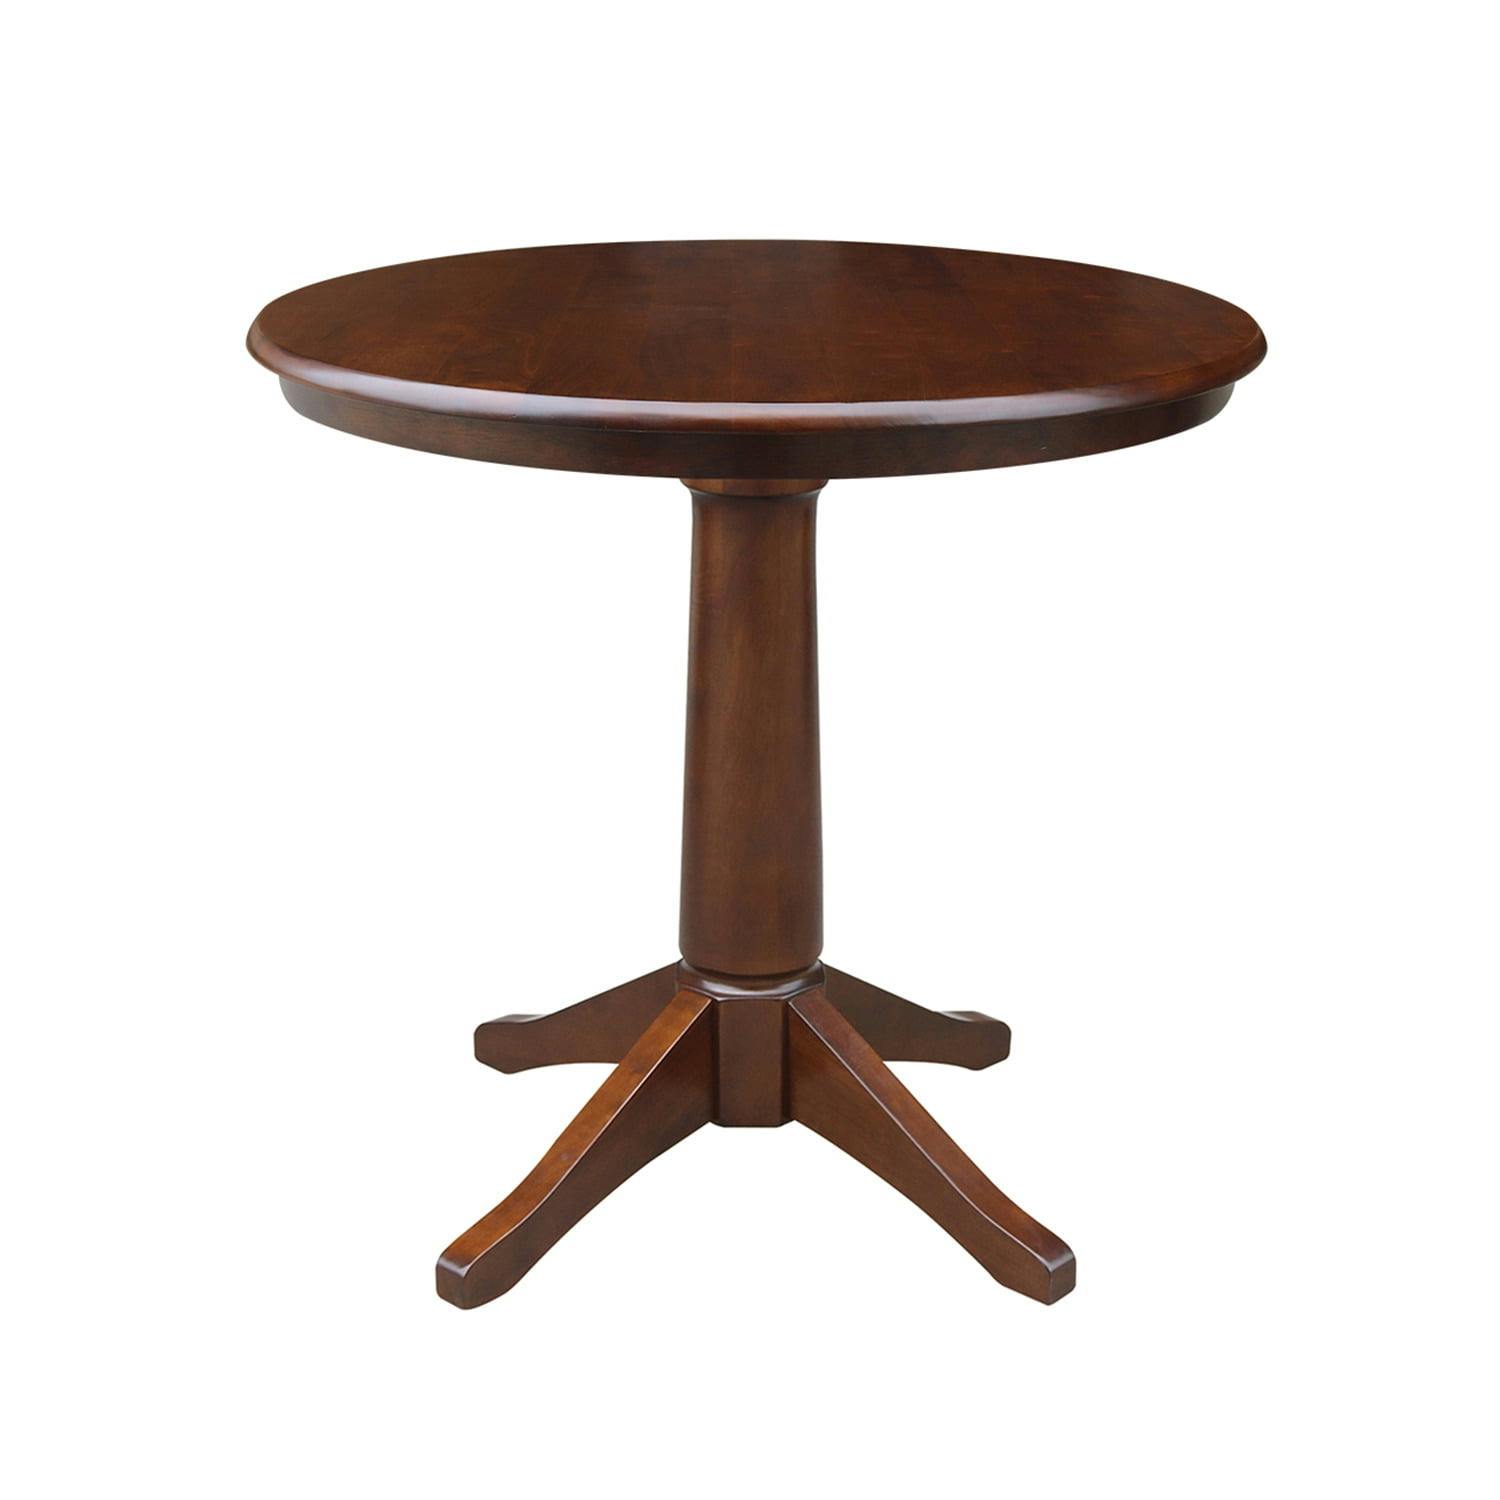 Elegant Espresso 38" Round Solid Wood French Country Dining Table